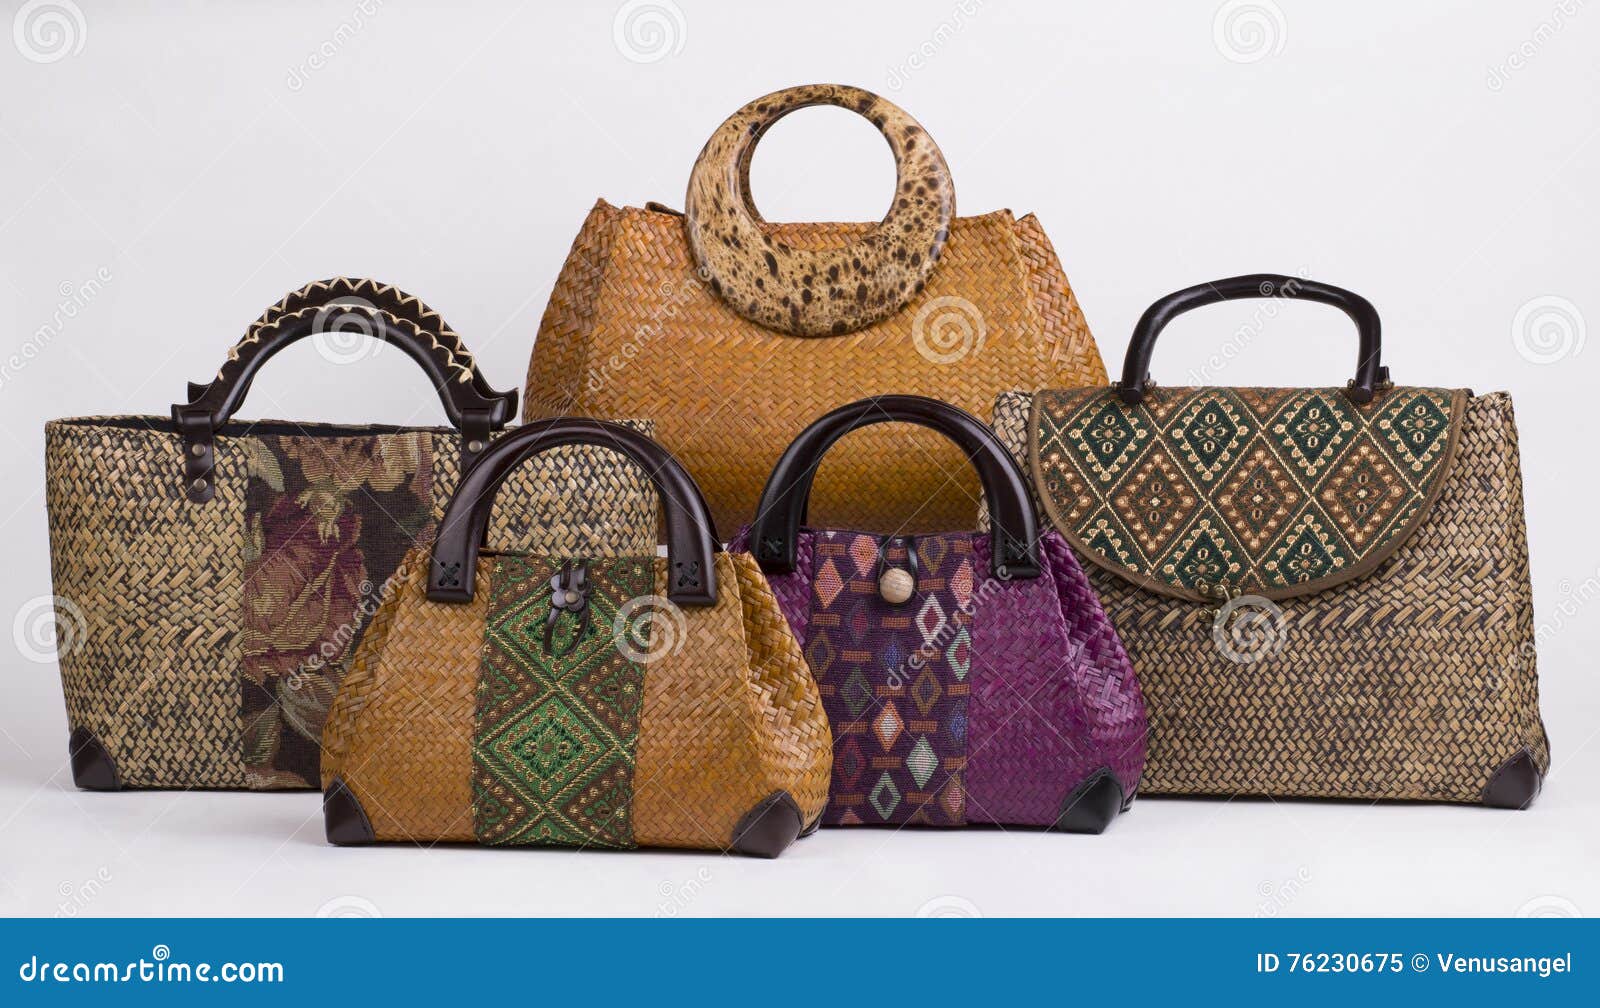 Thailand Products Jute Round Rattan Shoulder Hand Bags for women 50kg  Size Free Size